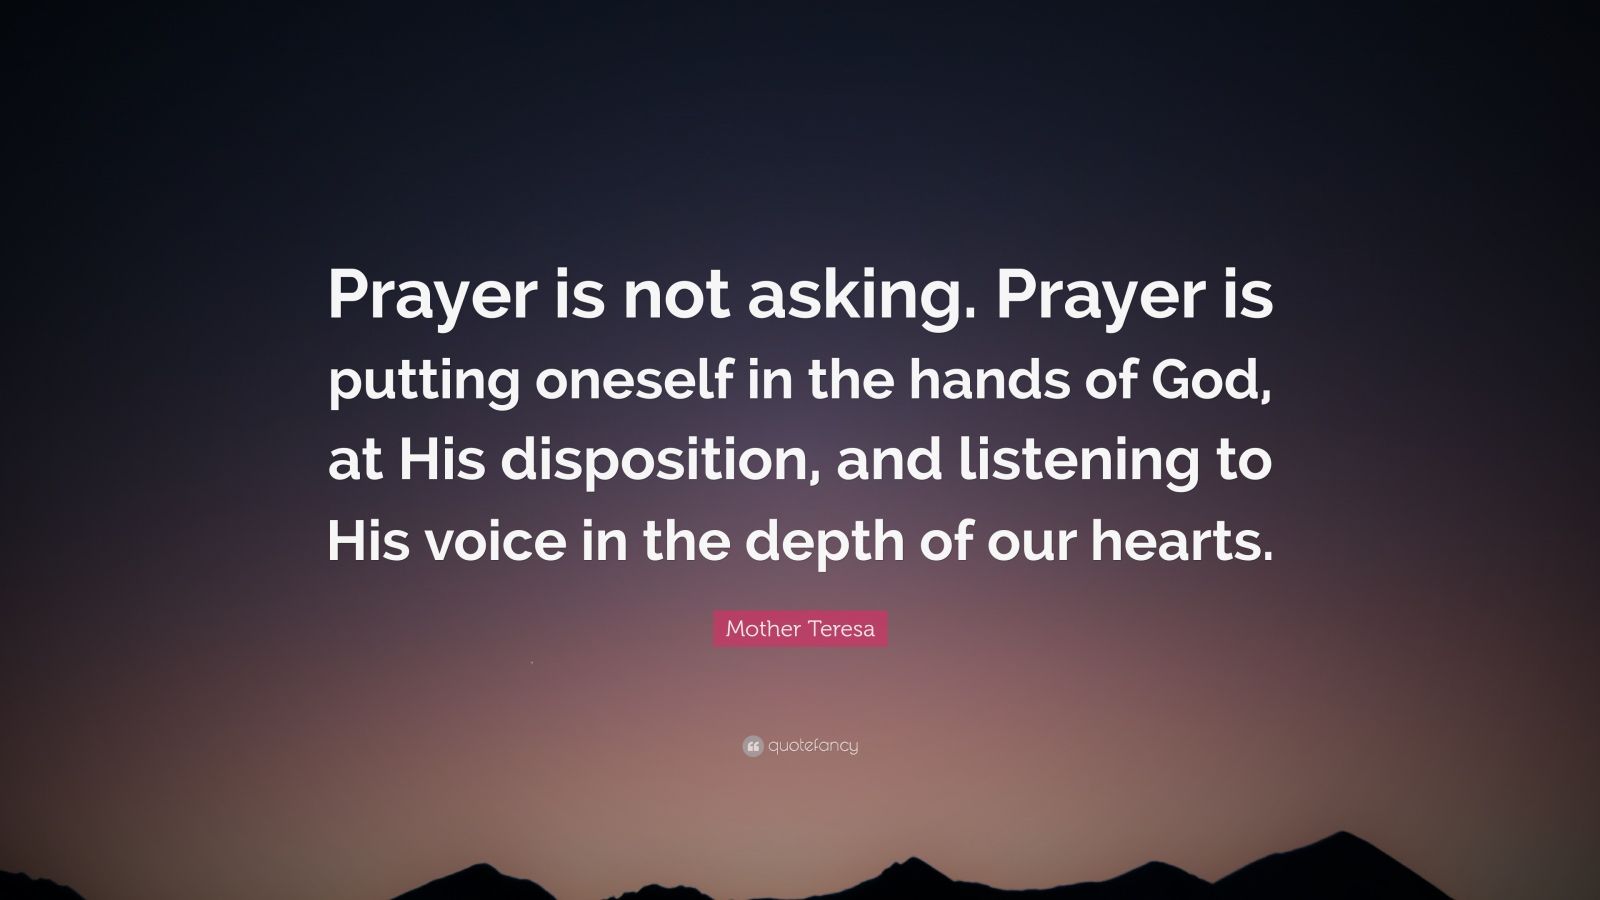 Mother Teresa Quote: “Prayer is not asking. Prayer is putting oneself